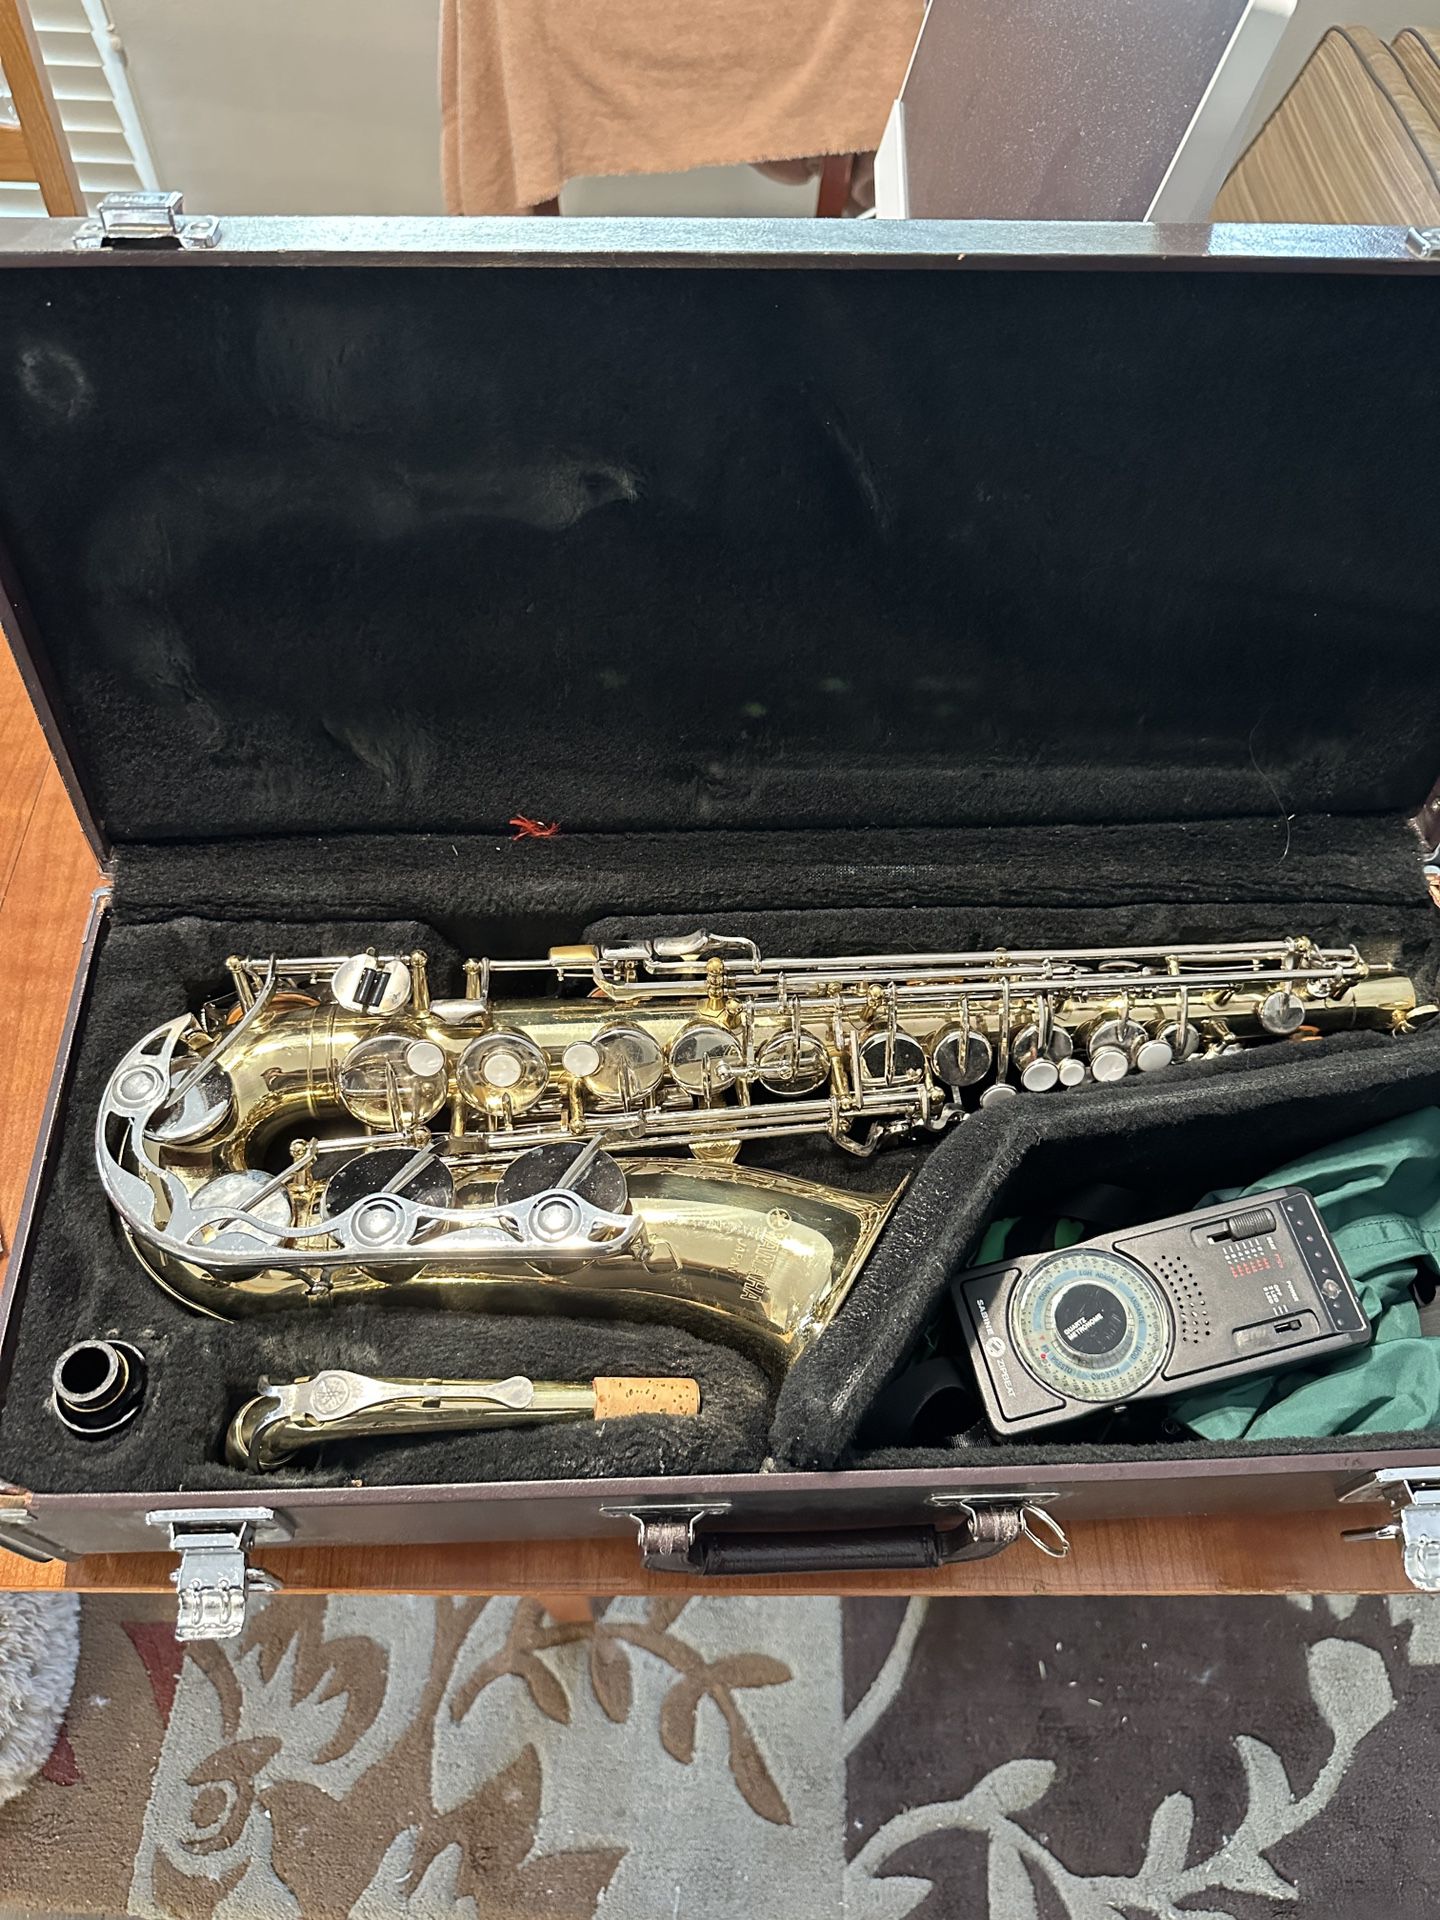 Alto Saxophone - Used, Normal Wear. $450 or best offer